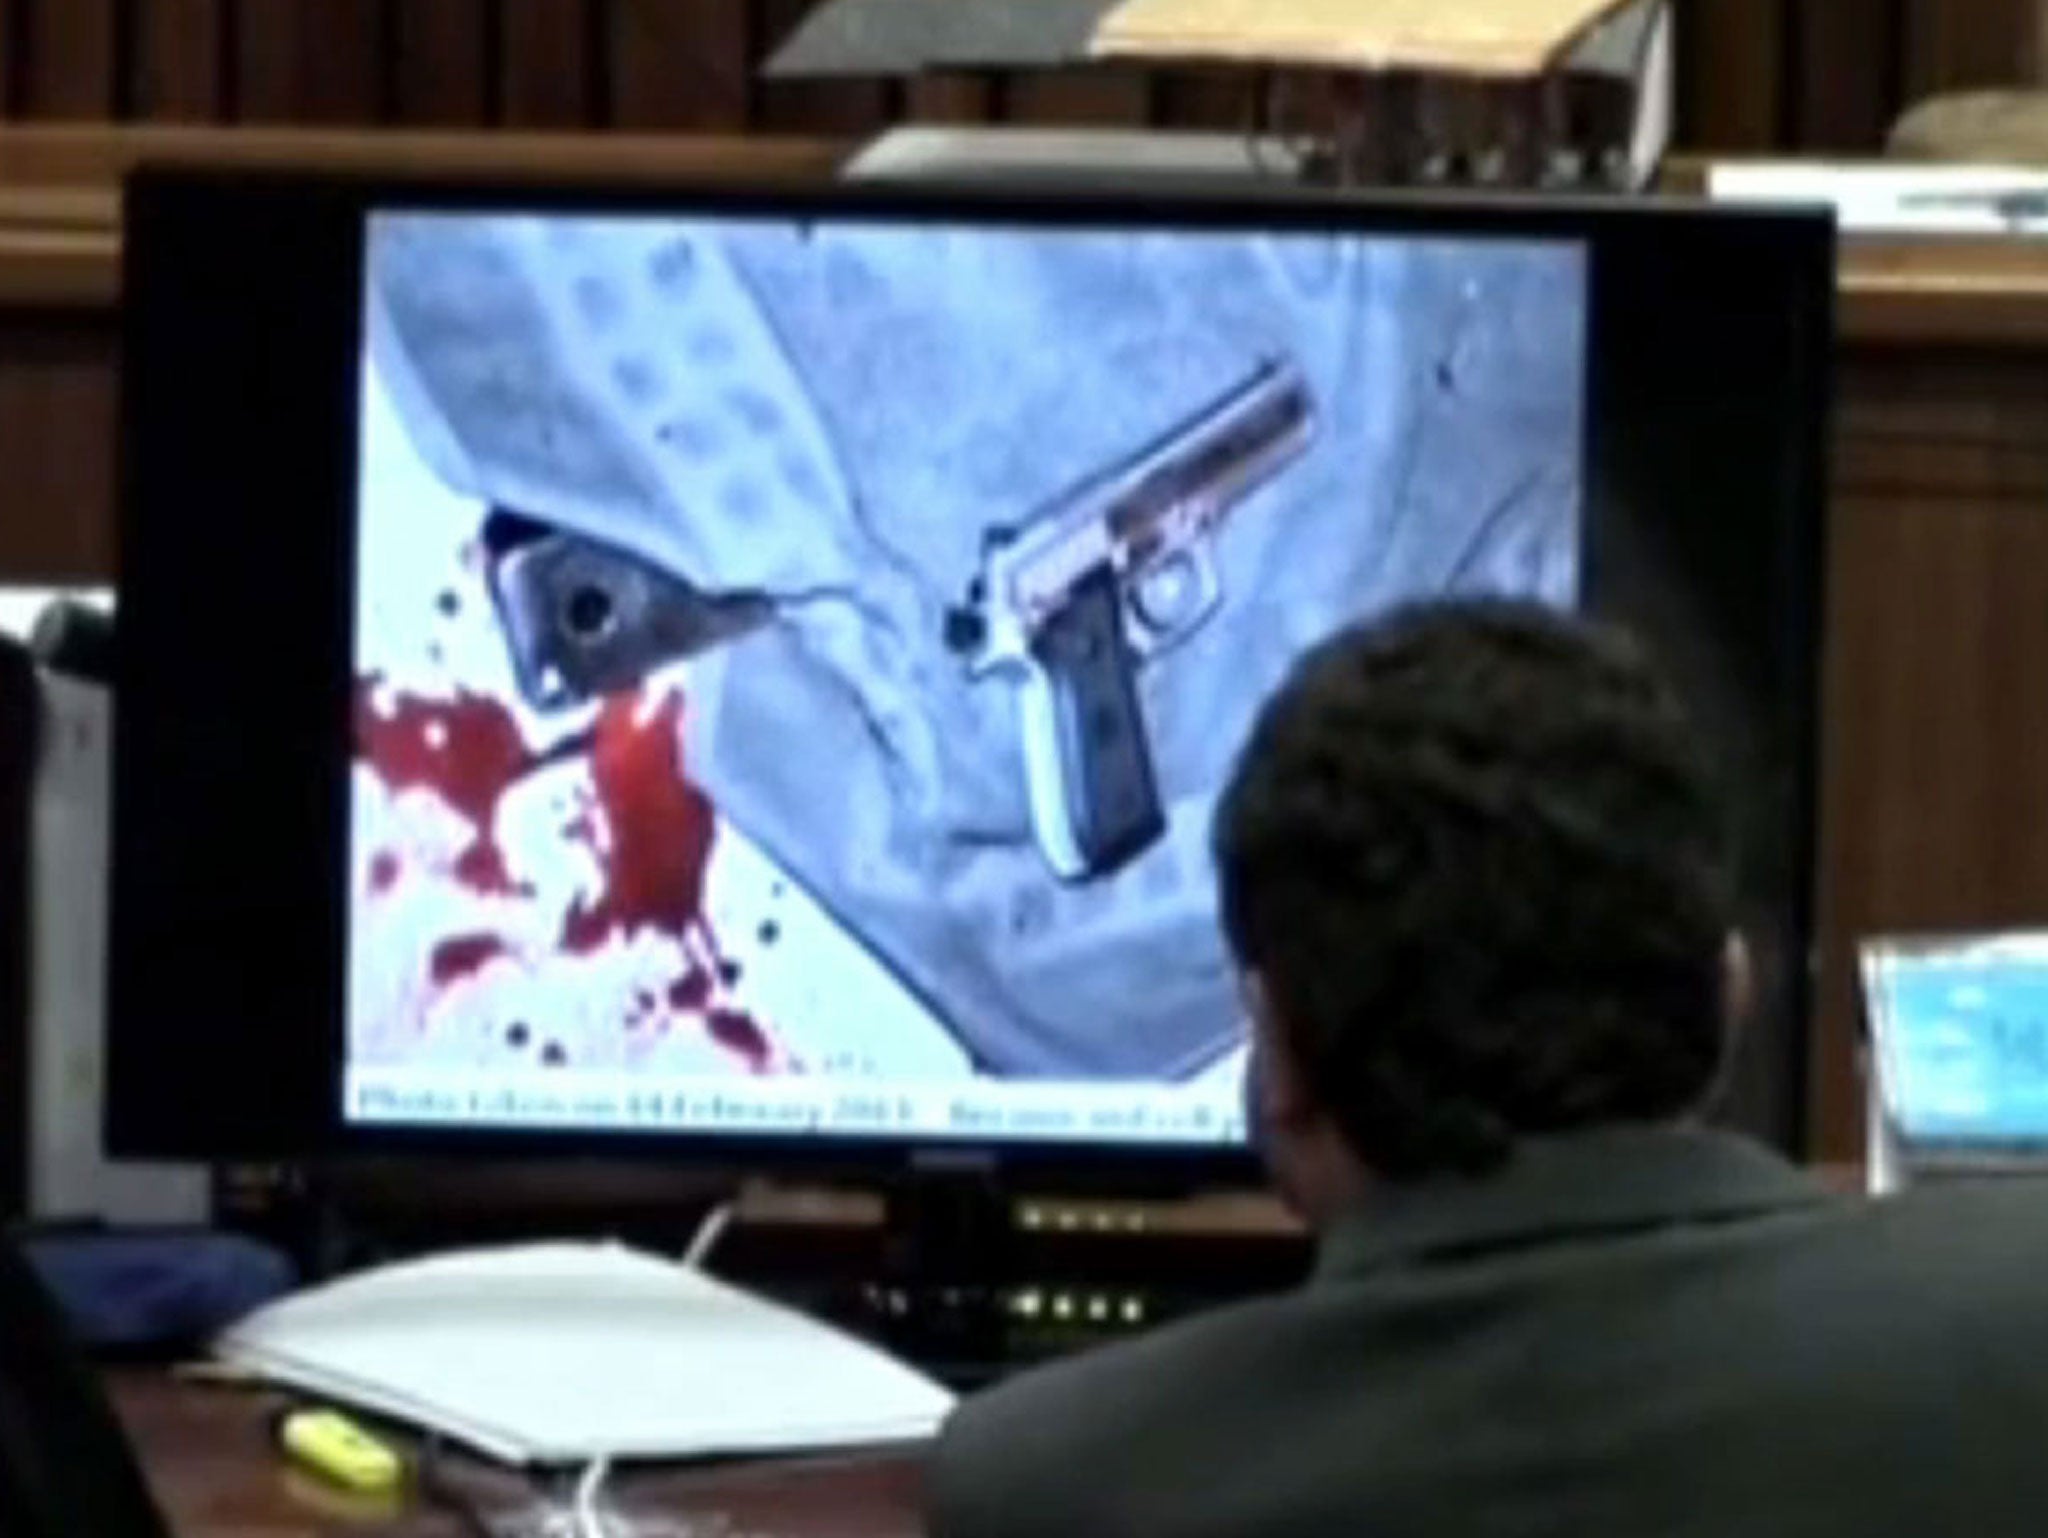 Graphic evidence, including the athlete's blood-stained gun, was shown in court today